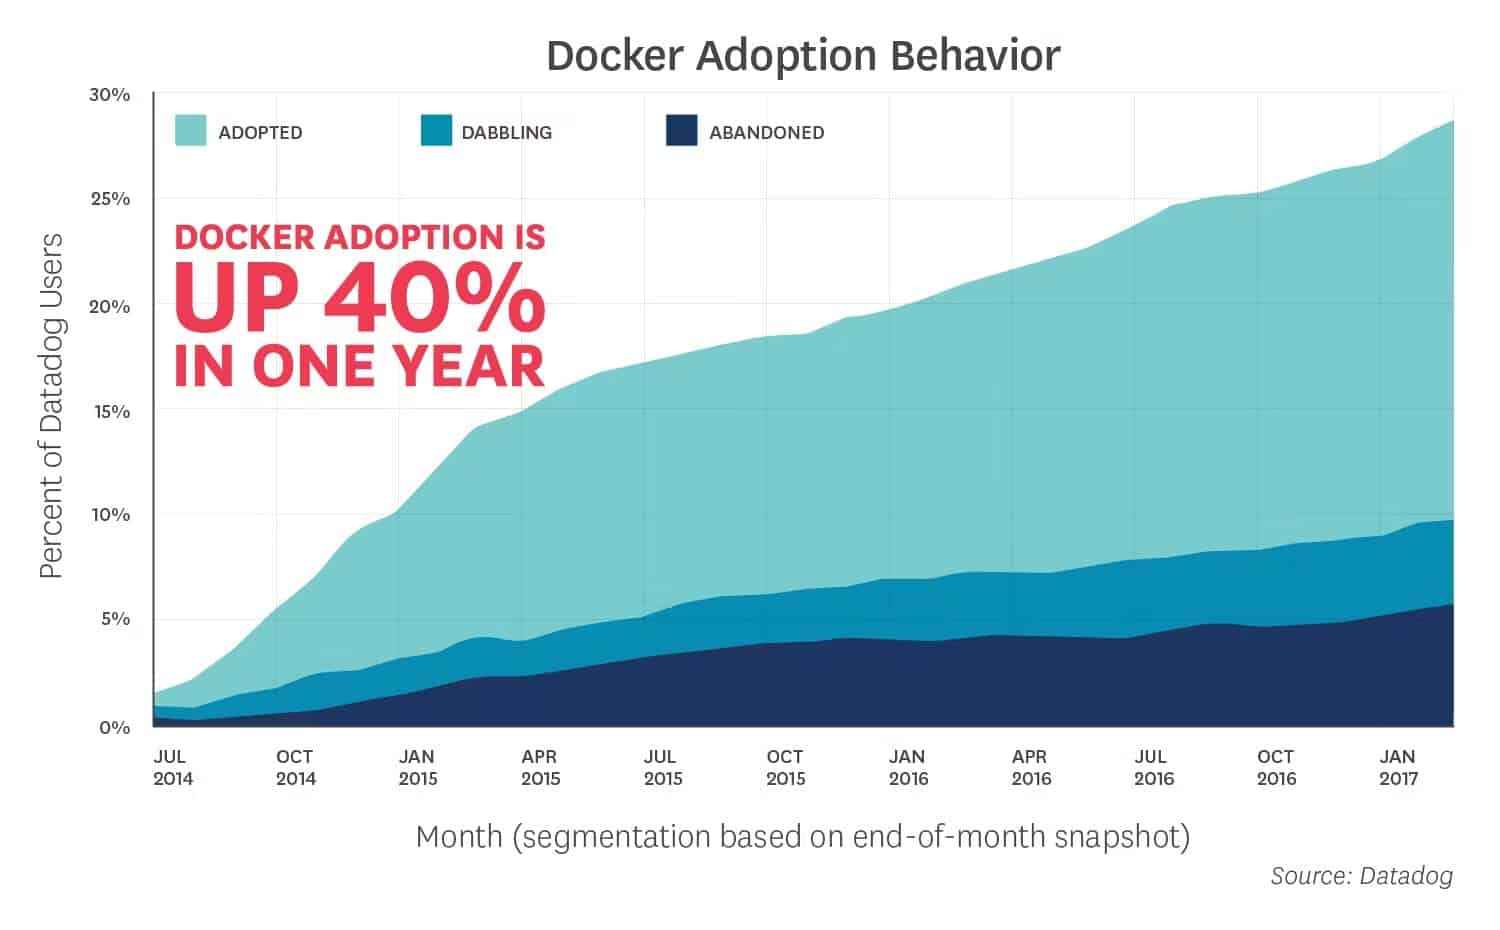 Chart showing Docker adoption behavior is up 40% in one year